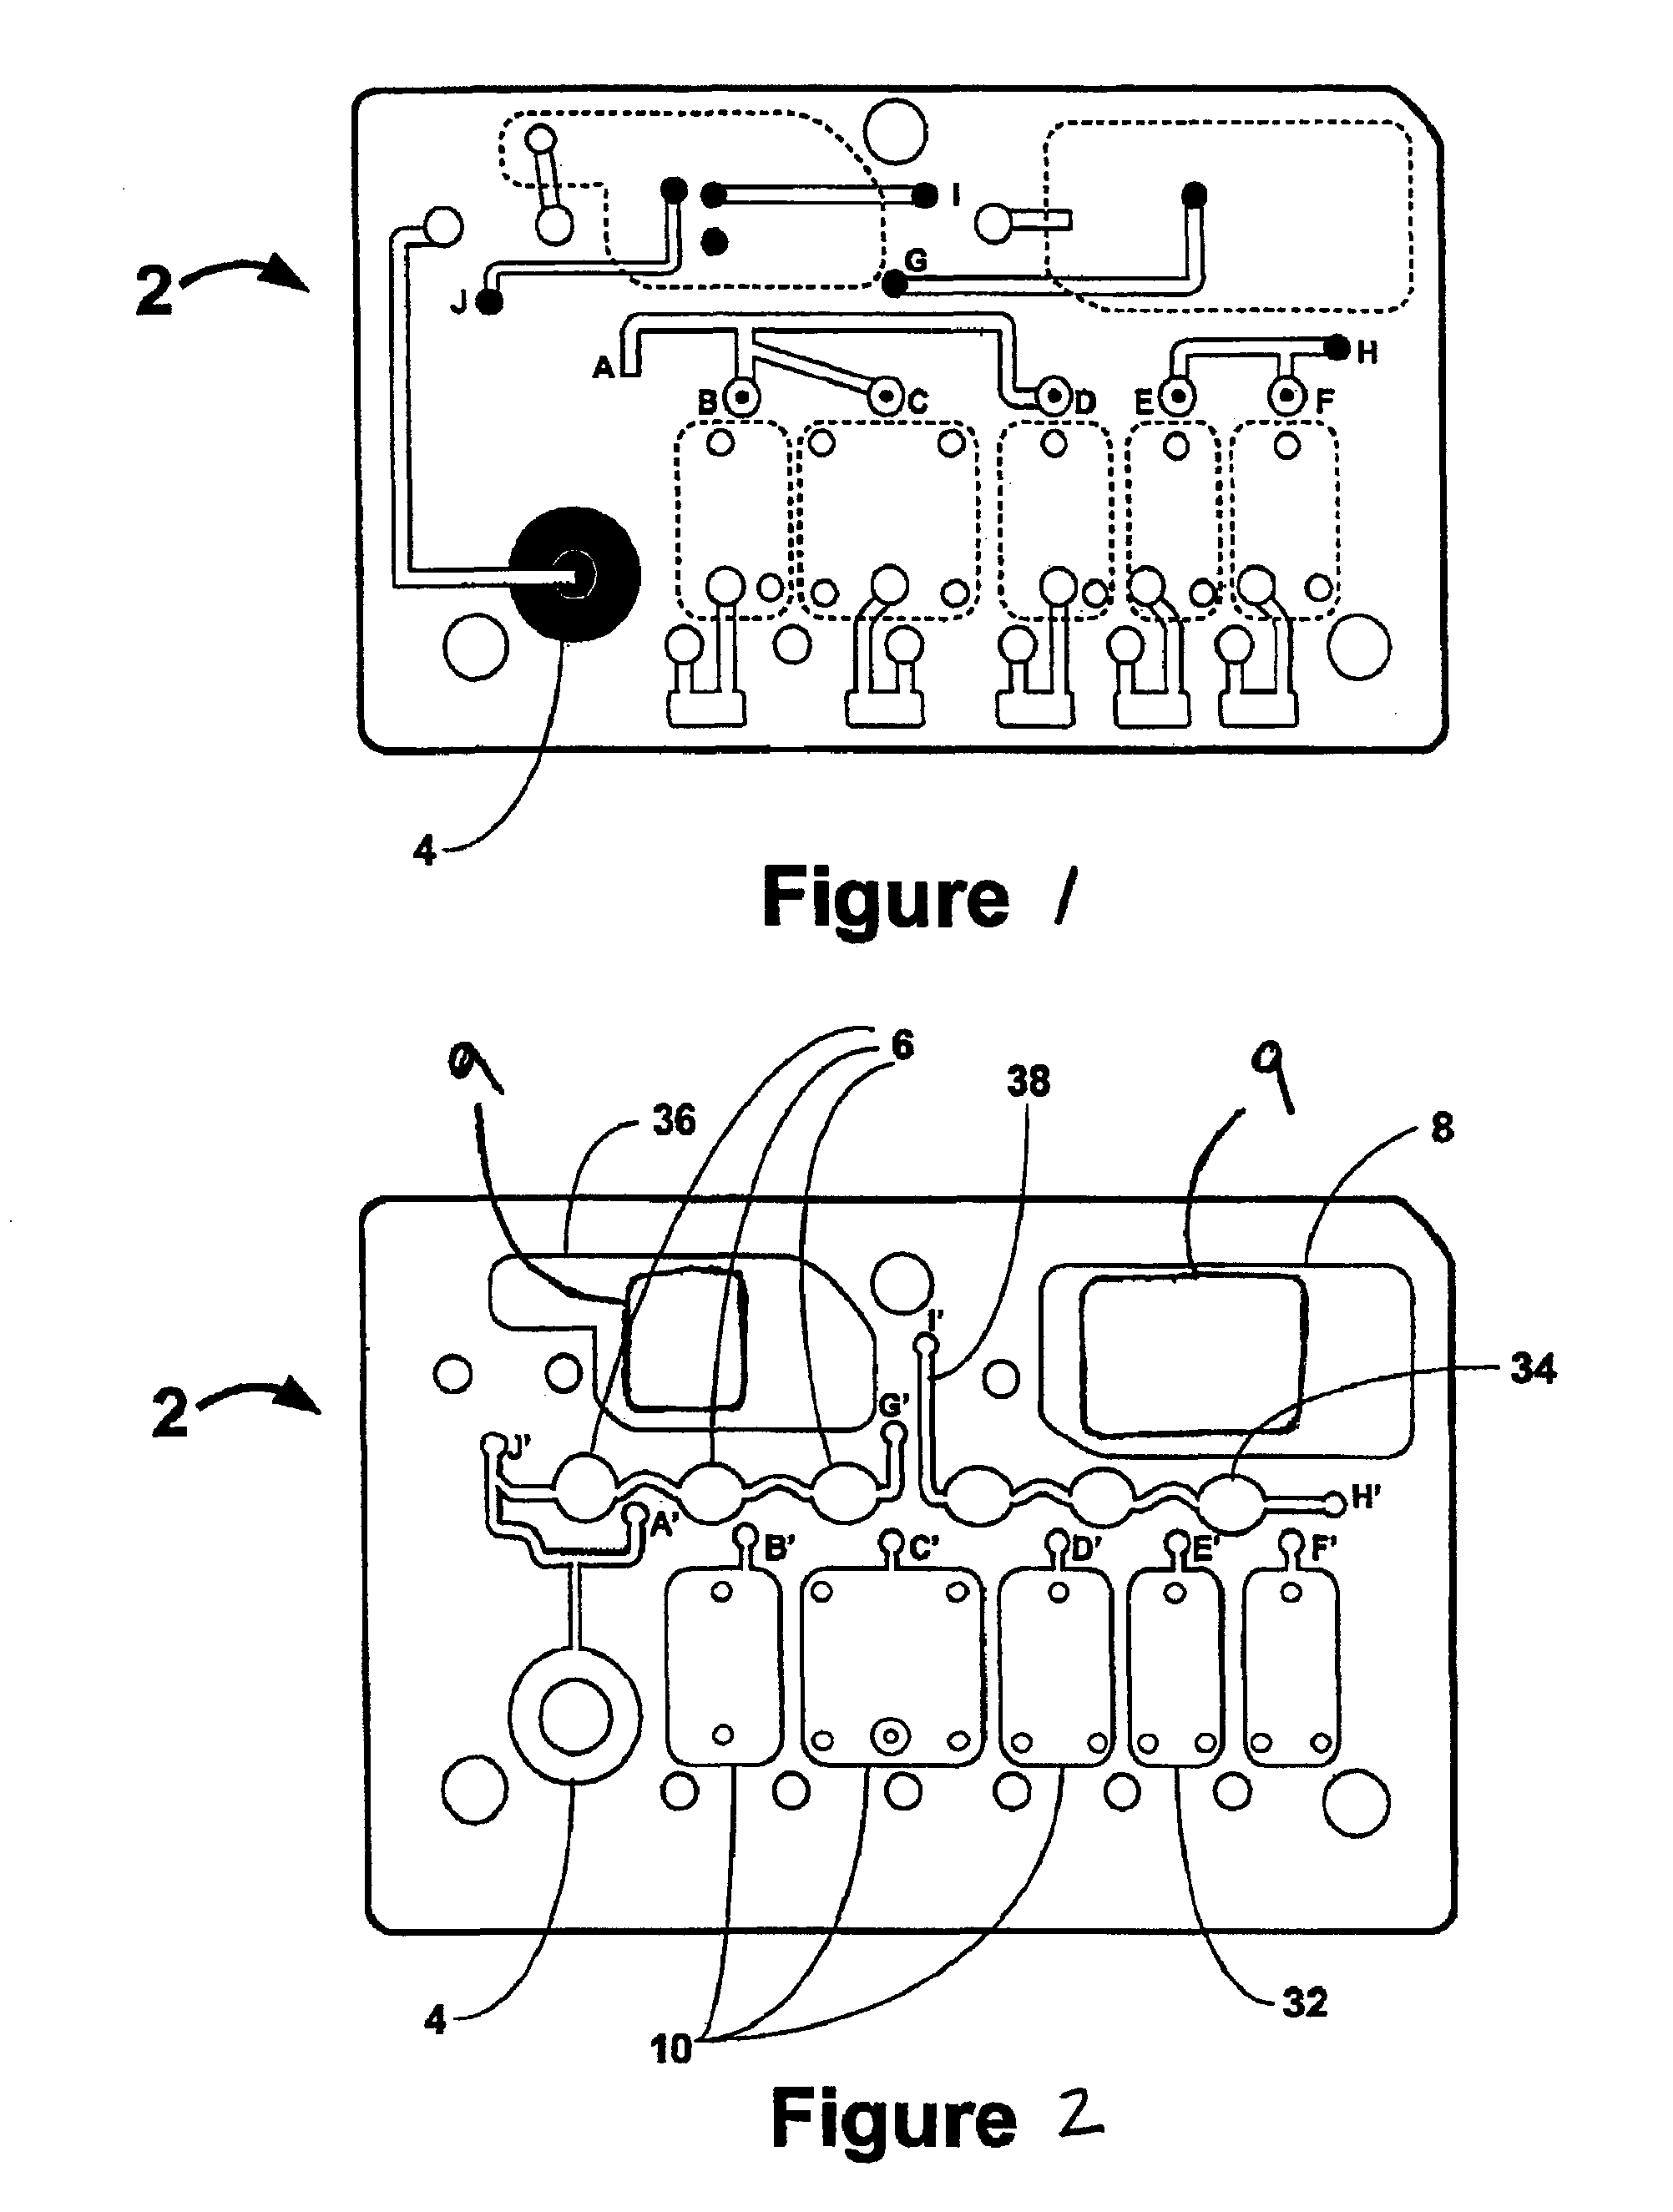 Reducing optical interference in a fluidic device